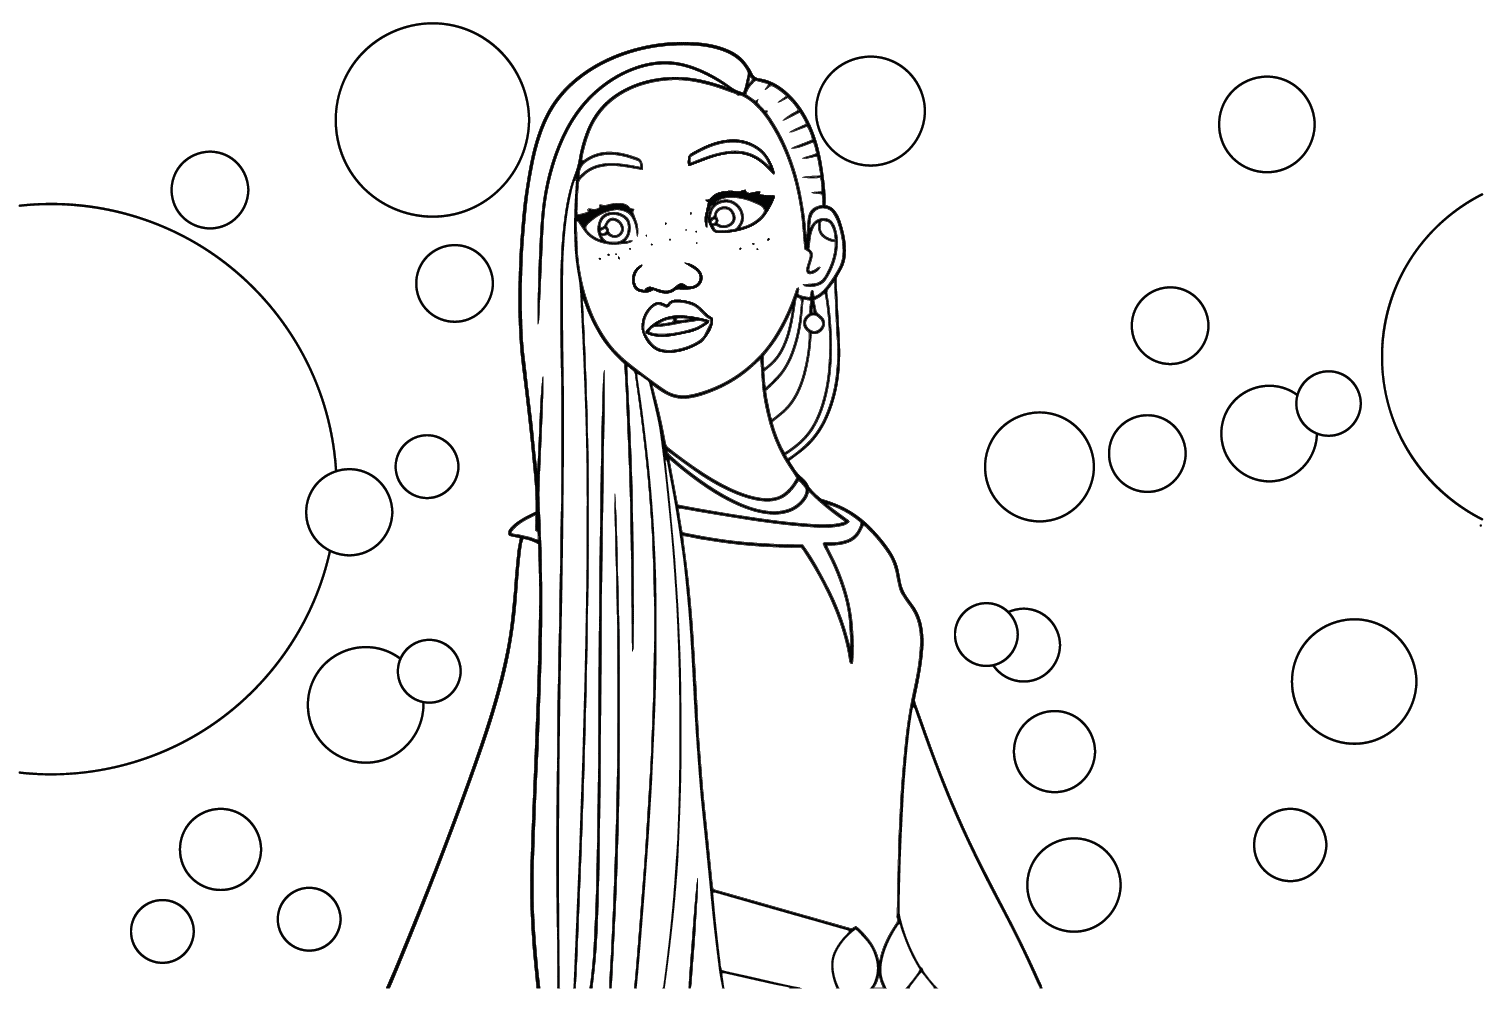 Asha Coloring Pages to Printable - Free Printable Coloring Pages